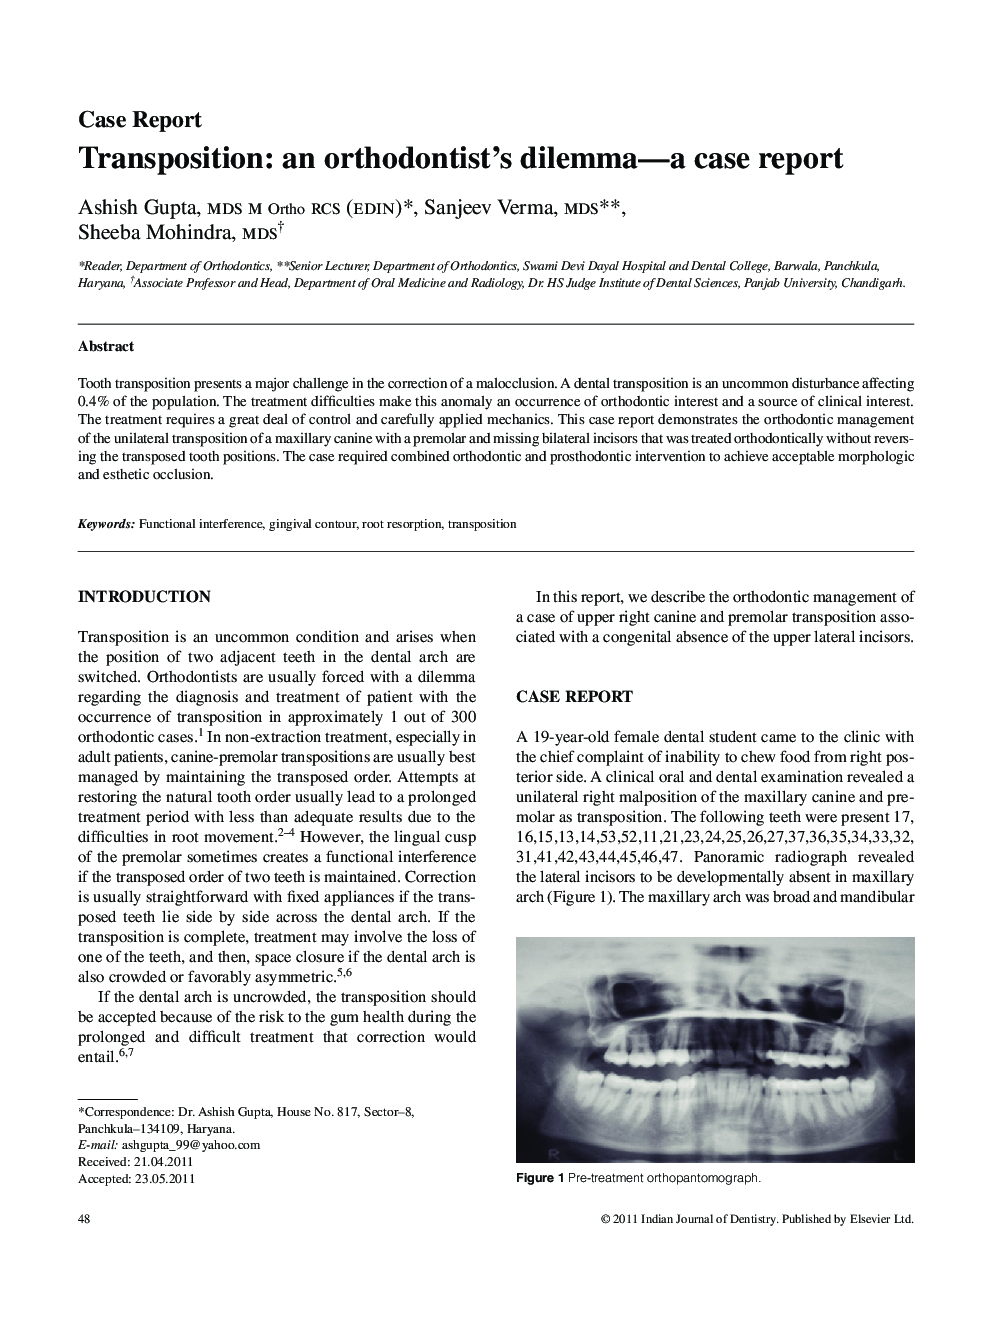 Transposition: an orthodontist's dilemma-a case report